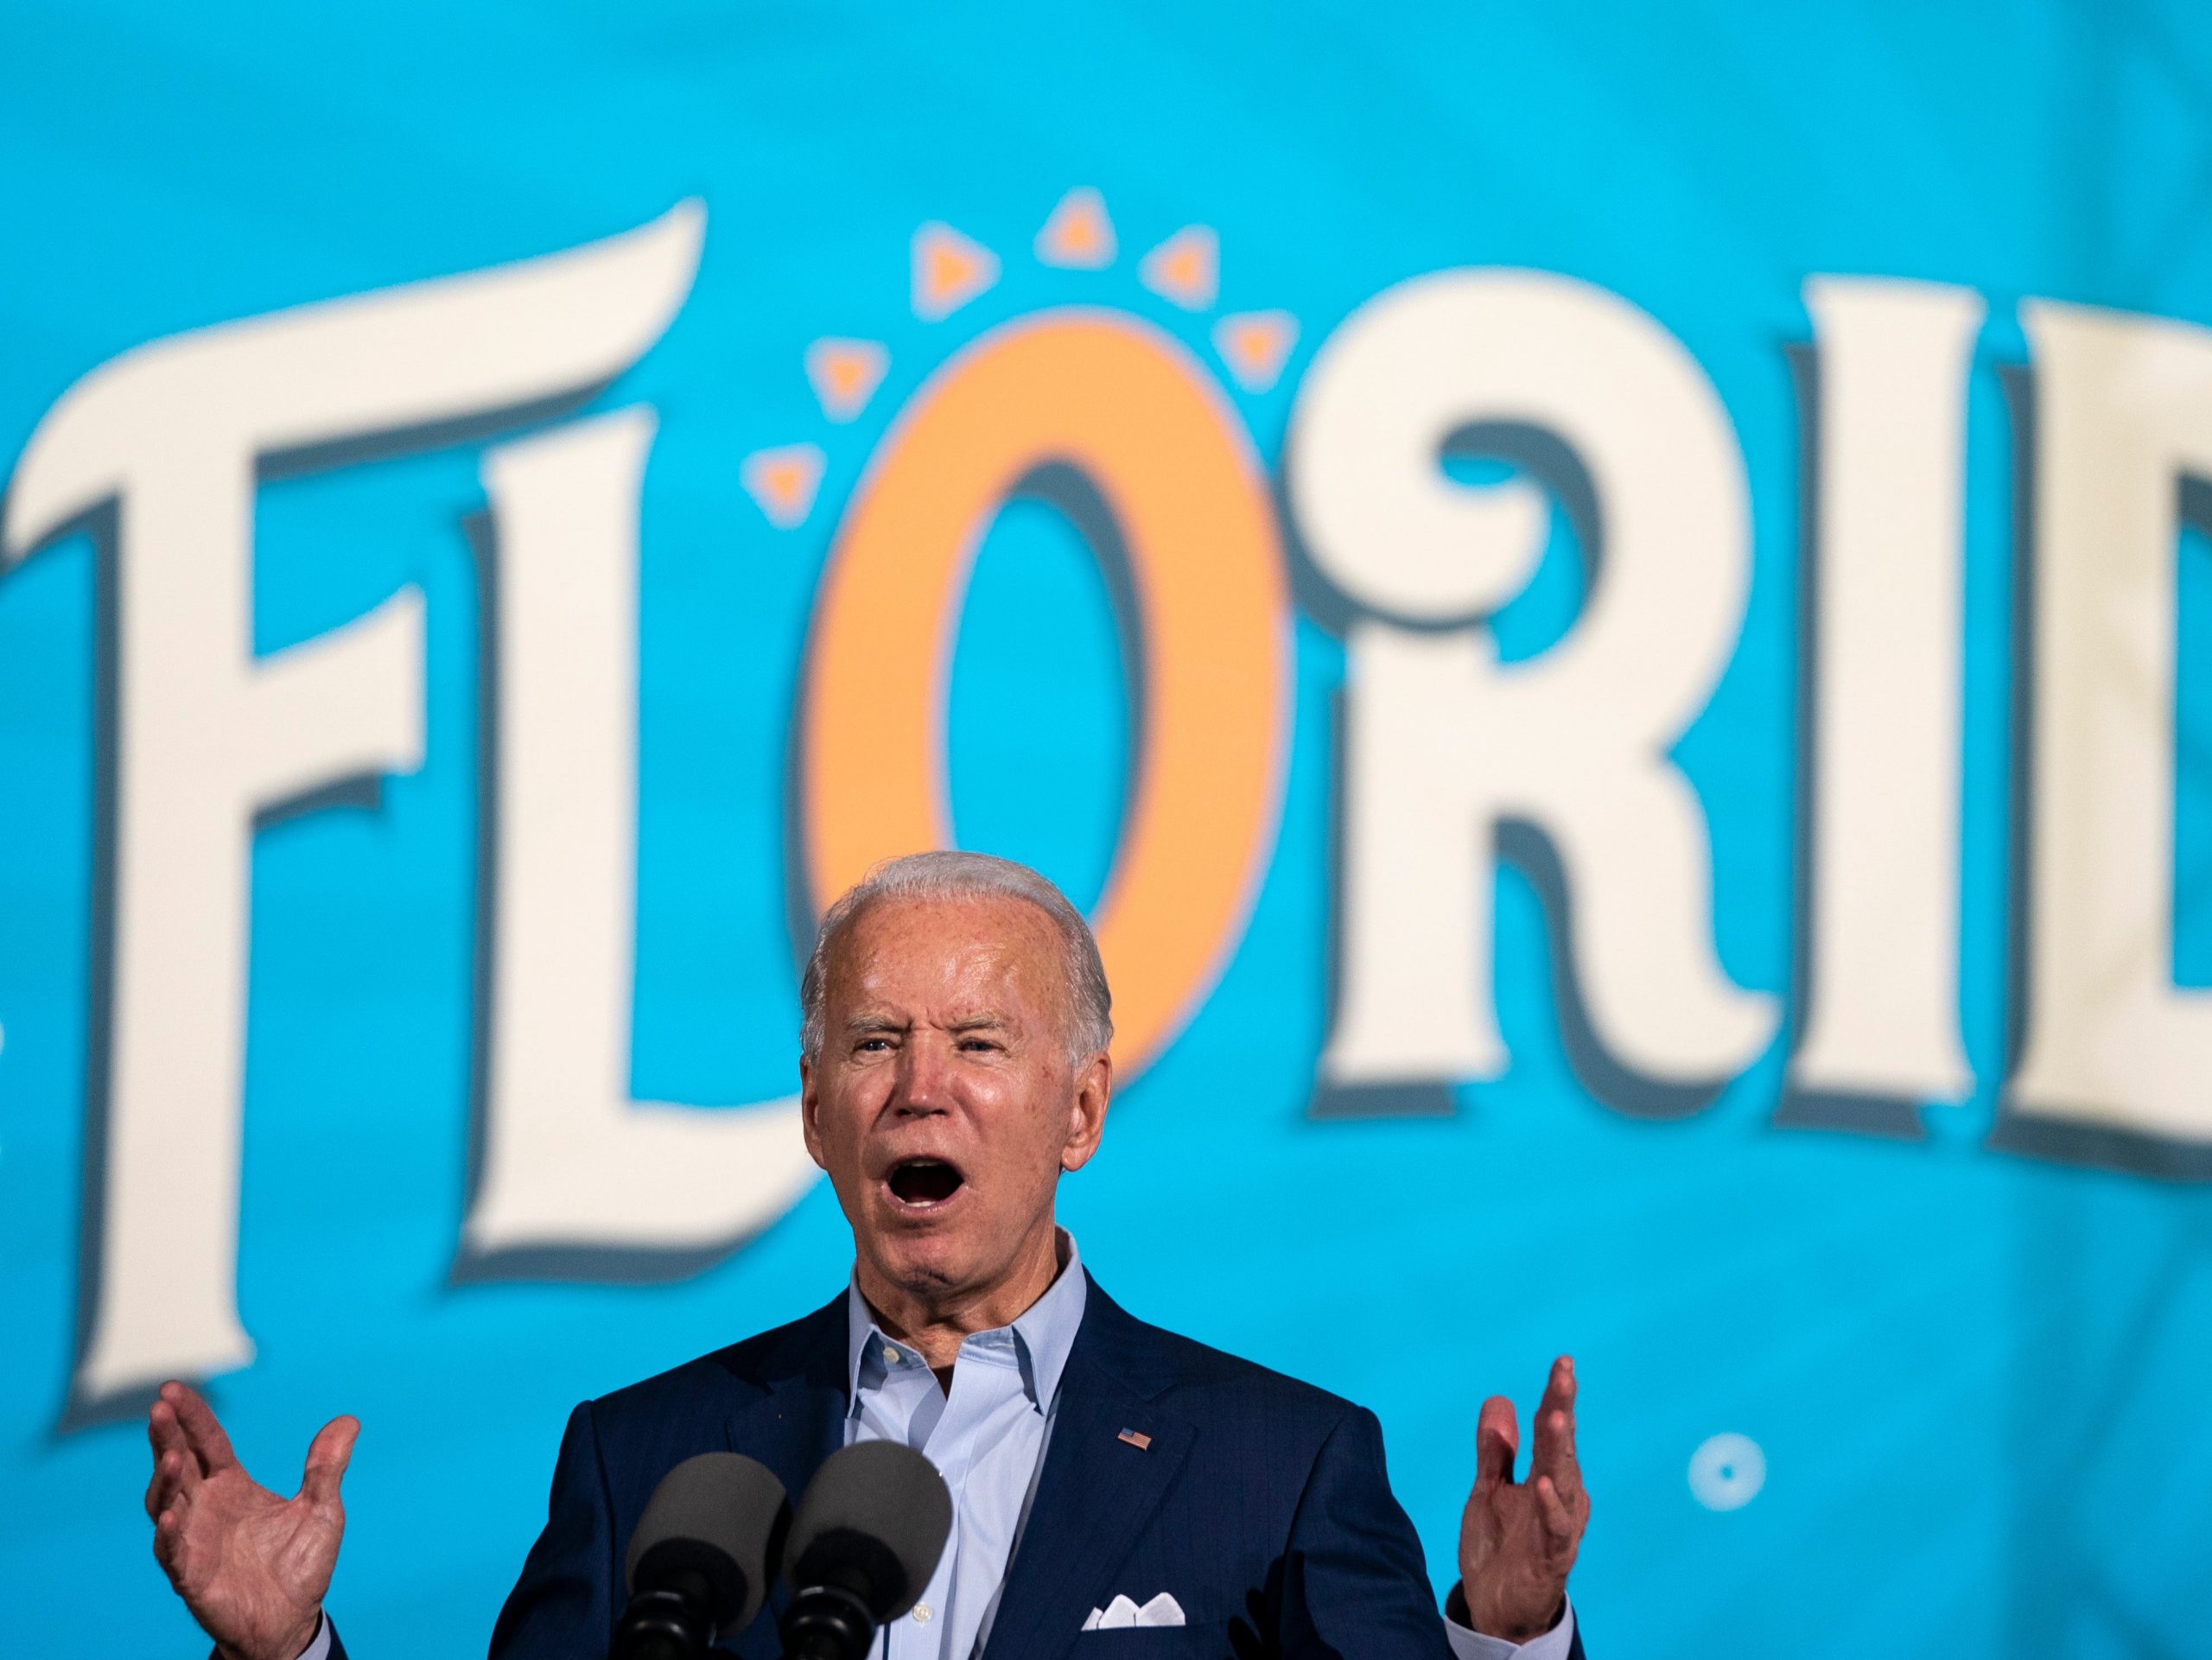 Polls for 2020 live: The latest possibility as Trump lags Biden on the three battlefield stats